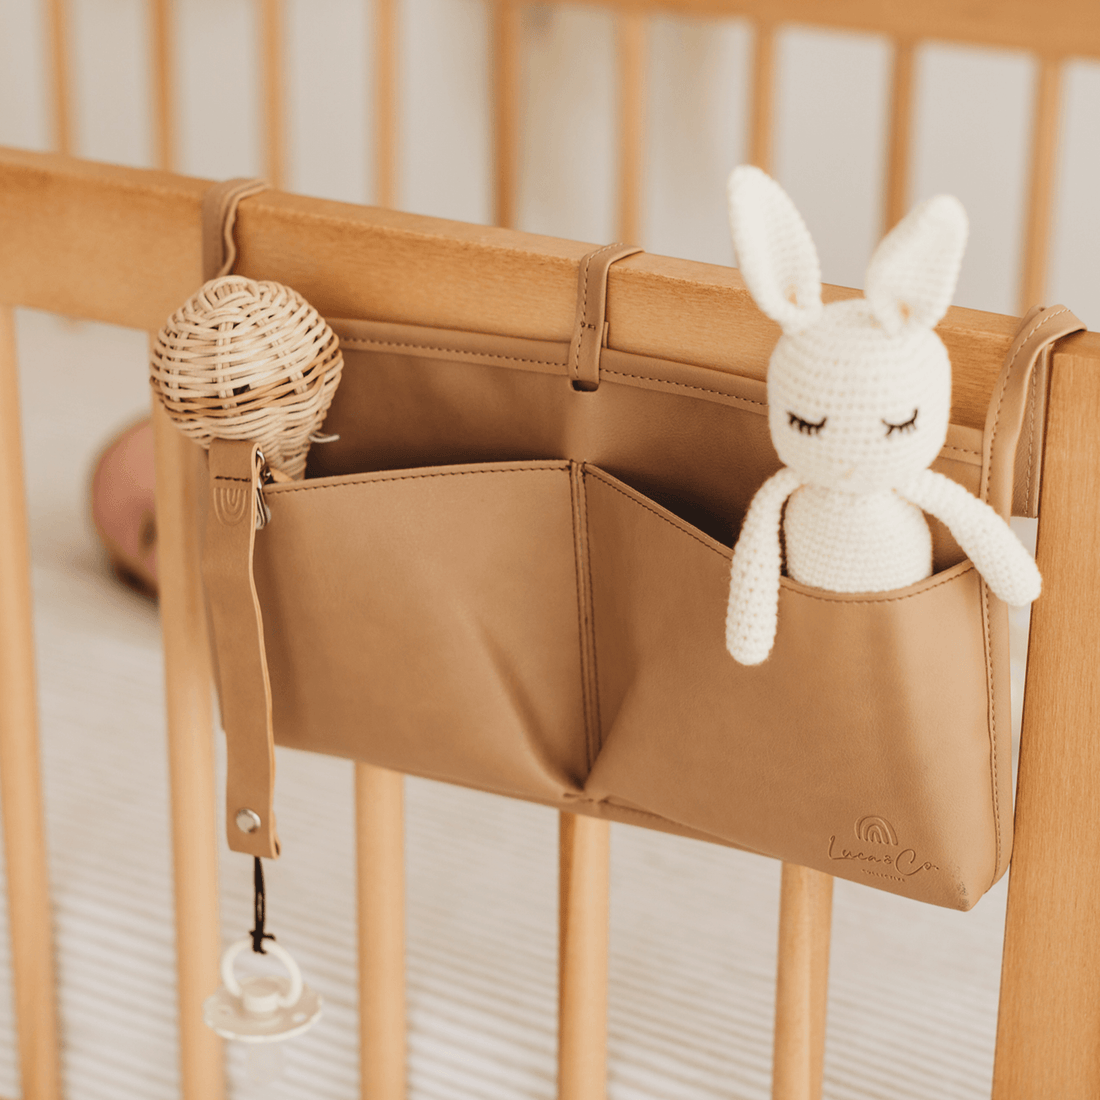 Vegan Leather Cot Organiser- Tan - Luca and Co Collective